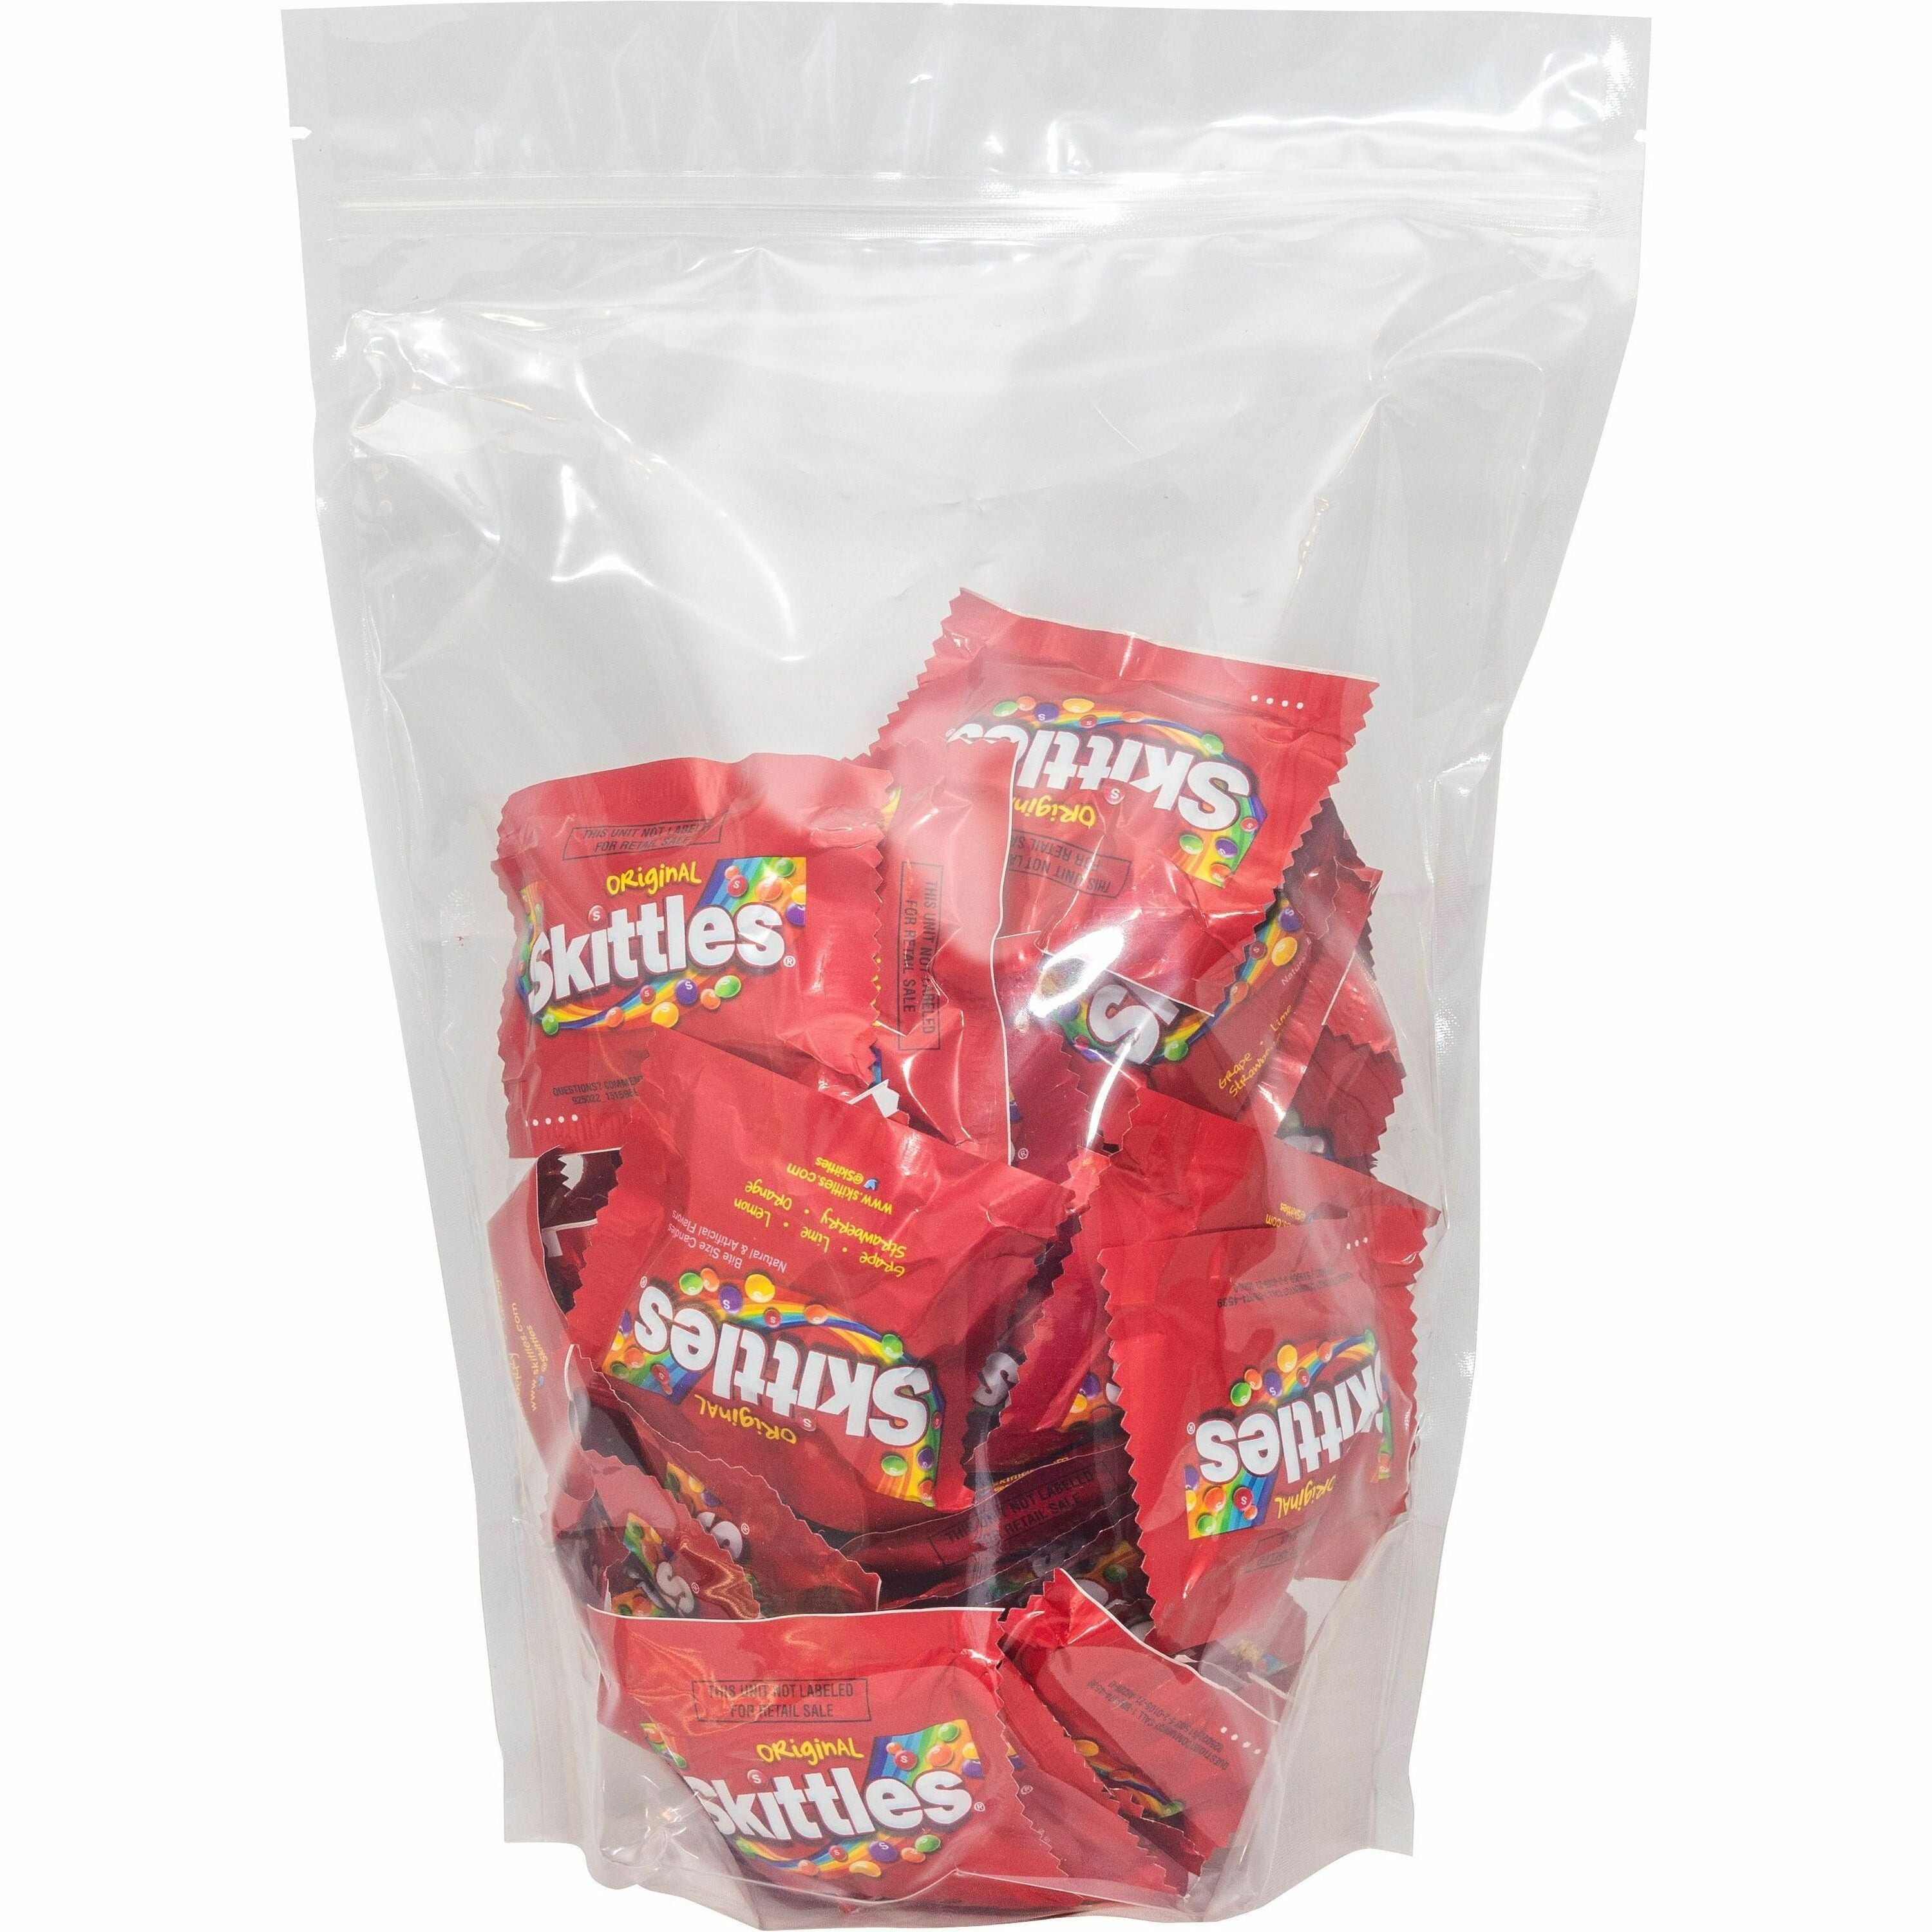 Penny Candy Skittles - Individually Wrapped - 2 lb - 1 Bag